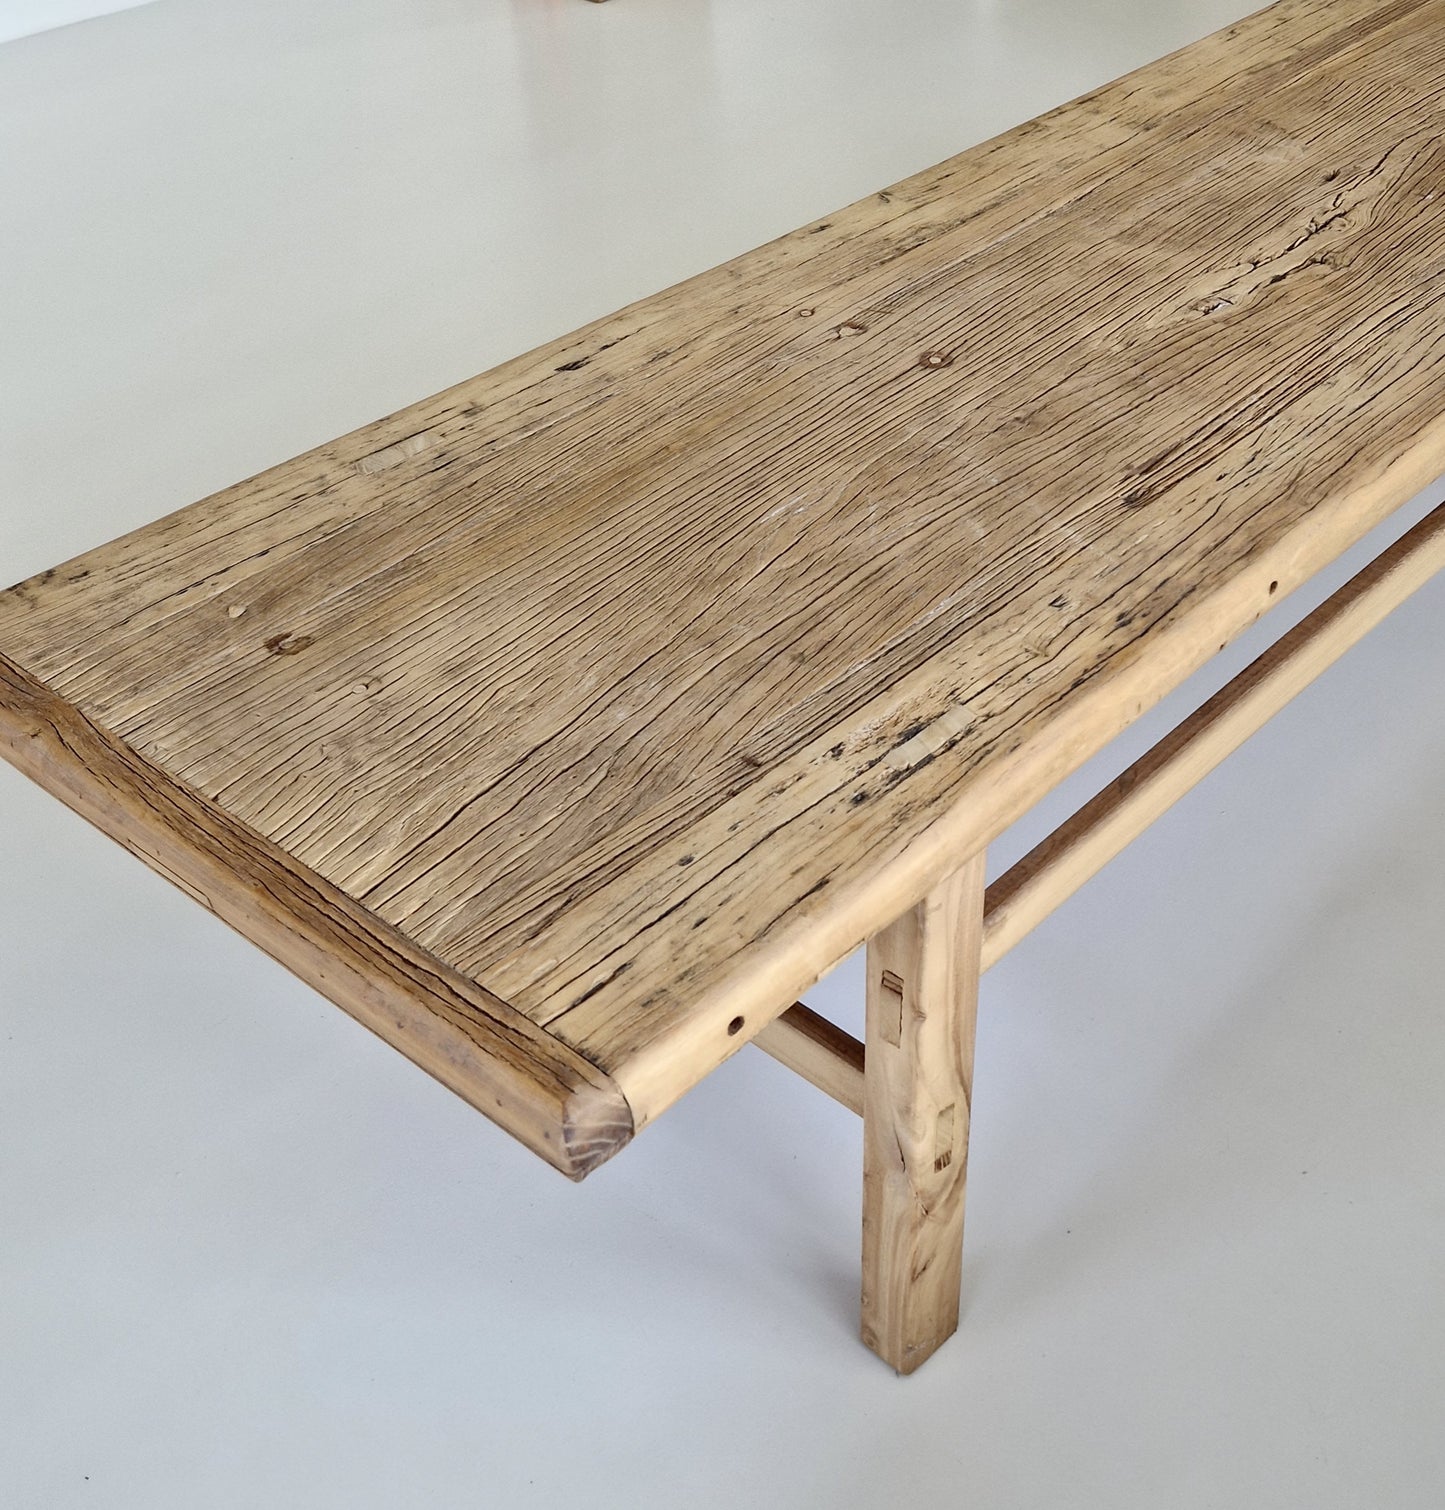 Chinese old wooden table long No.2 (164x50x41cm)